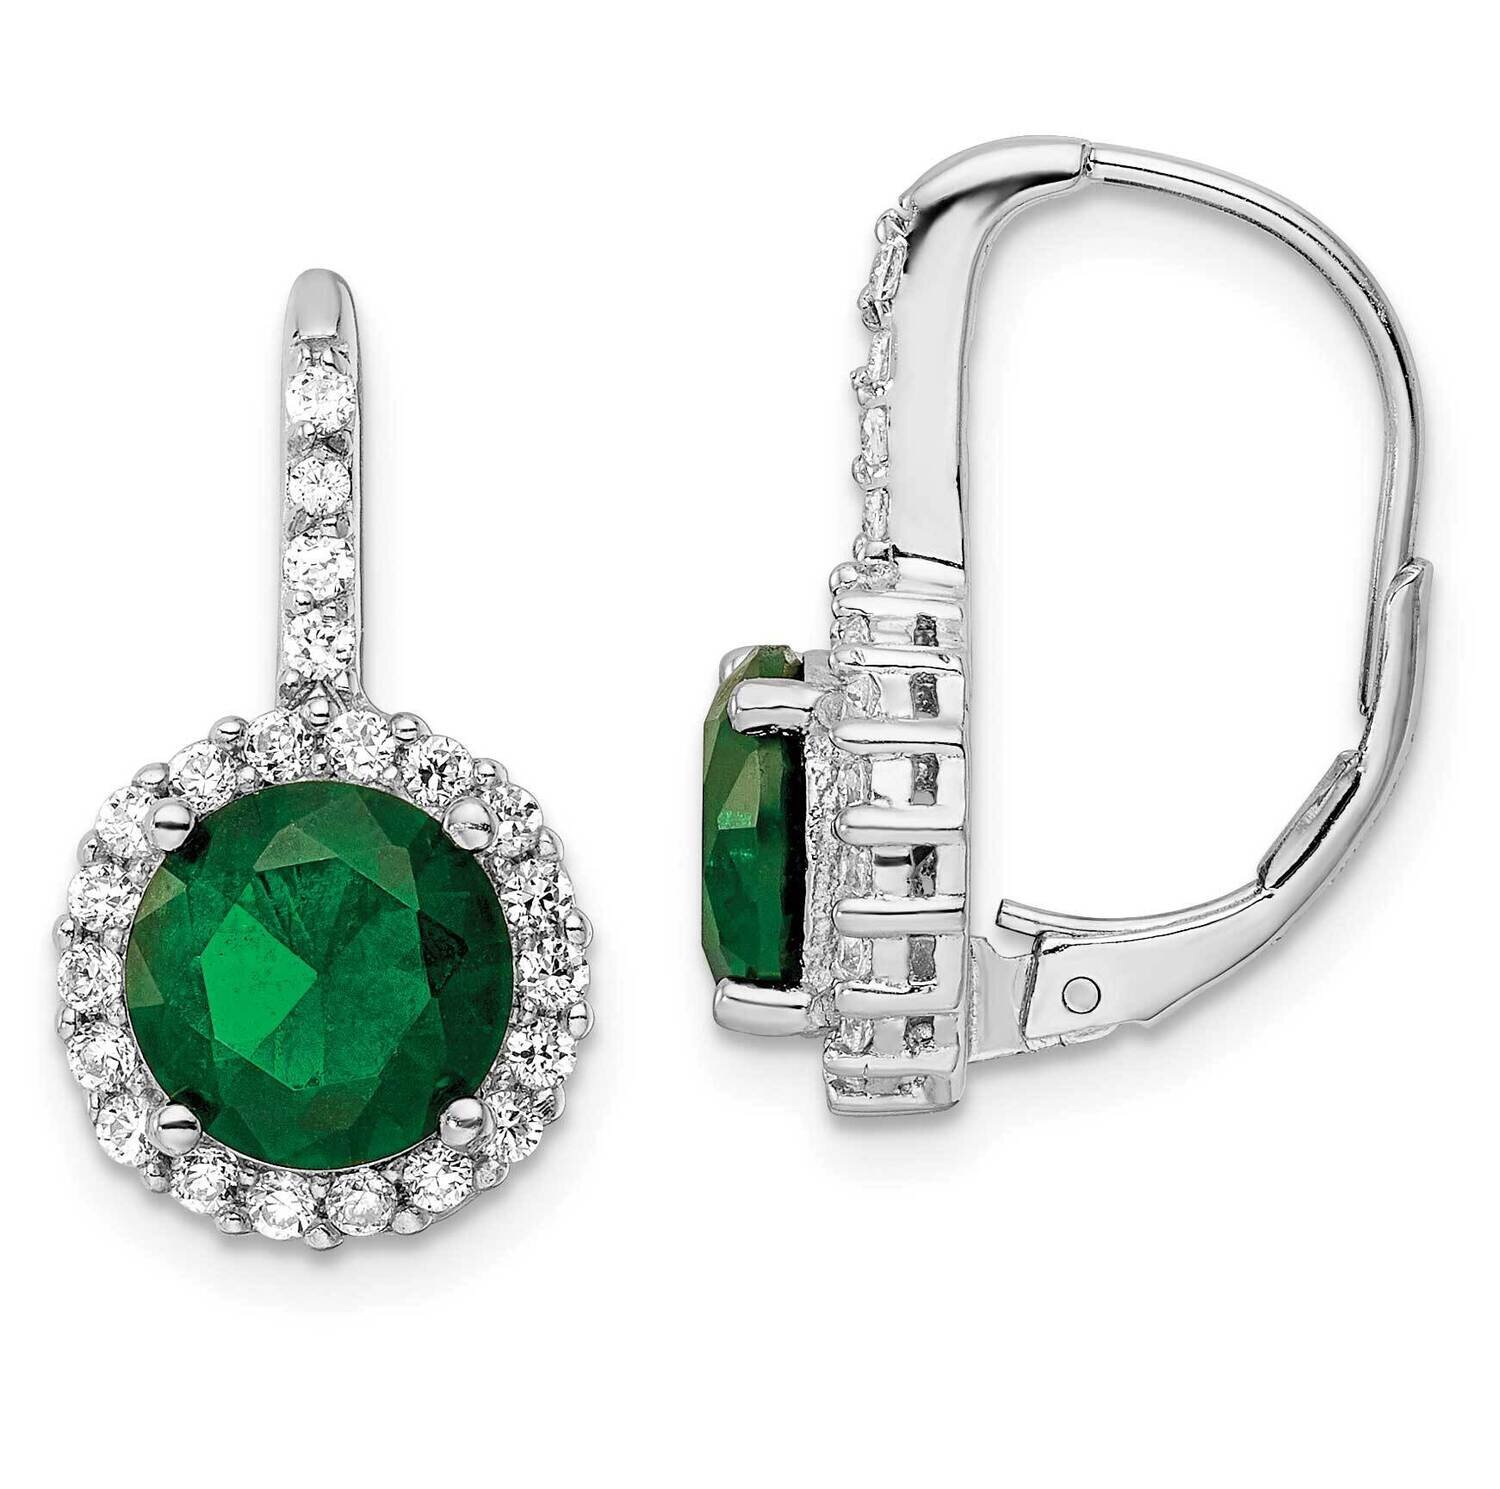 Cheryl Msimulated Emerald Center & CZ Diamond Leverback Earrings Sterling Silver Rhodium-plated QCM1480